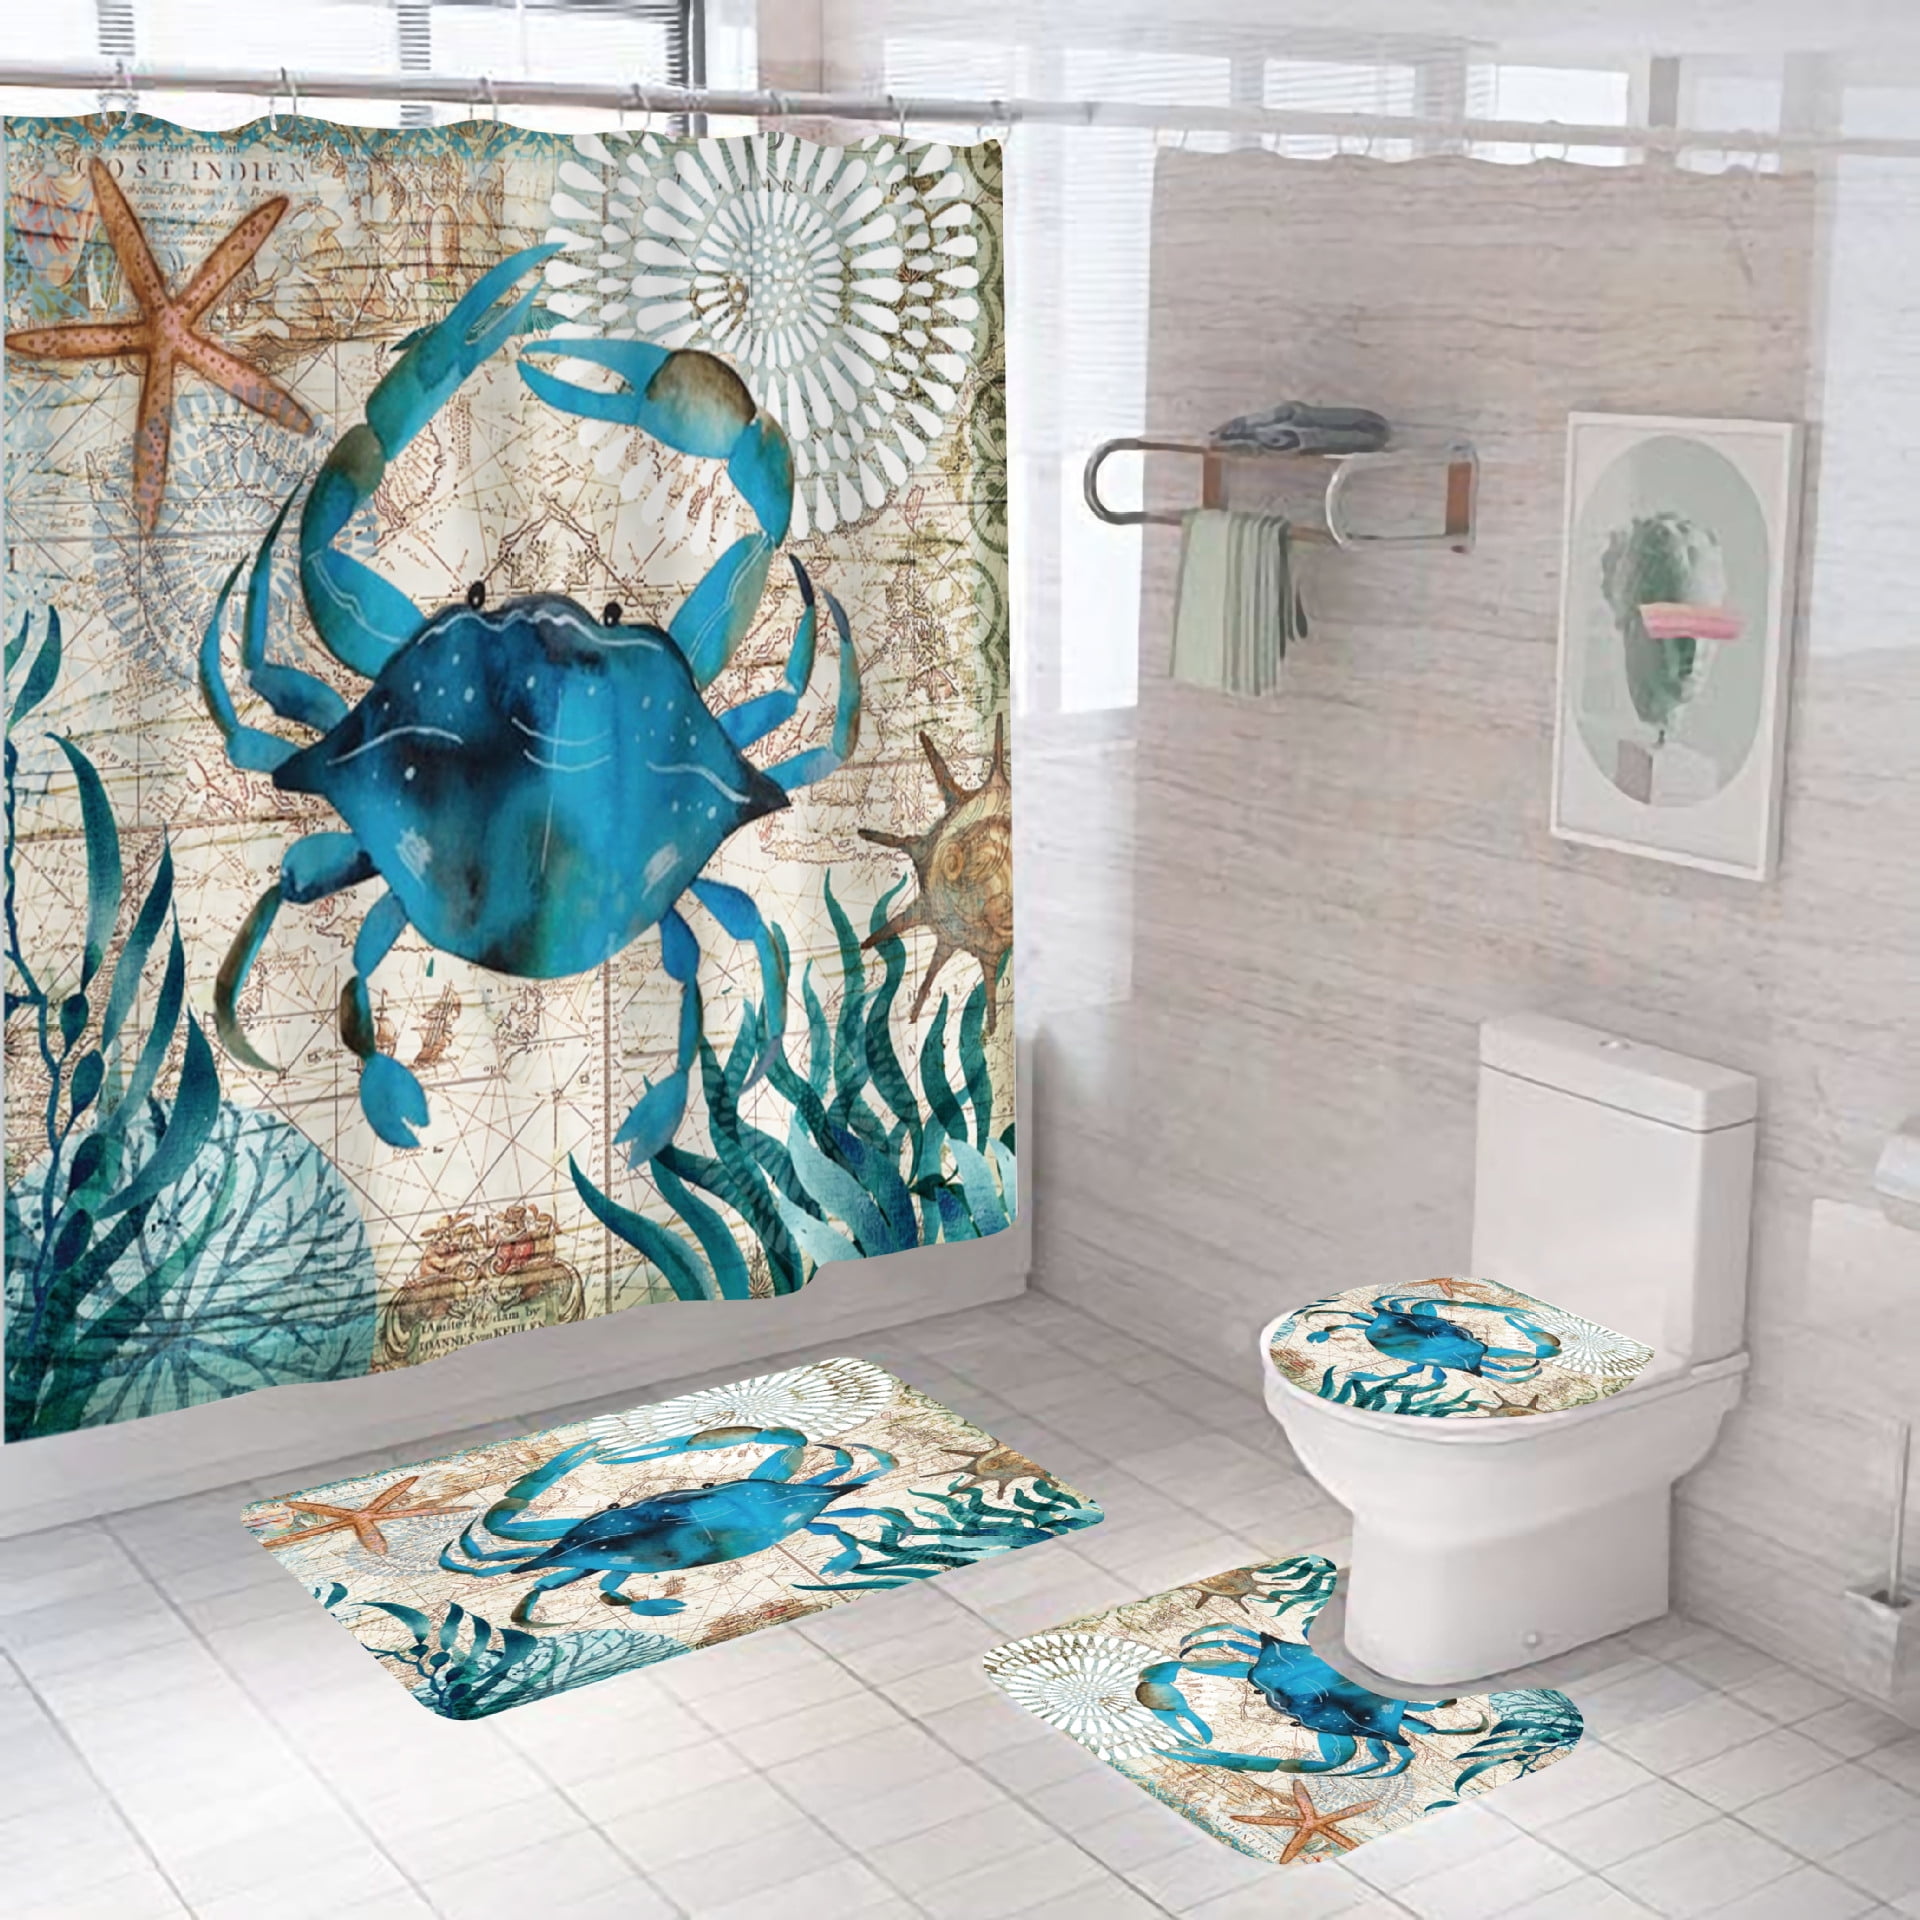 Abstract Blue Gold Marble Shower Curtain Bathroom Decor Fabric 12hooks 71in 